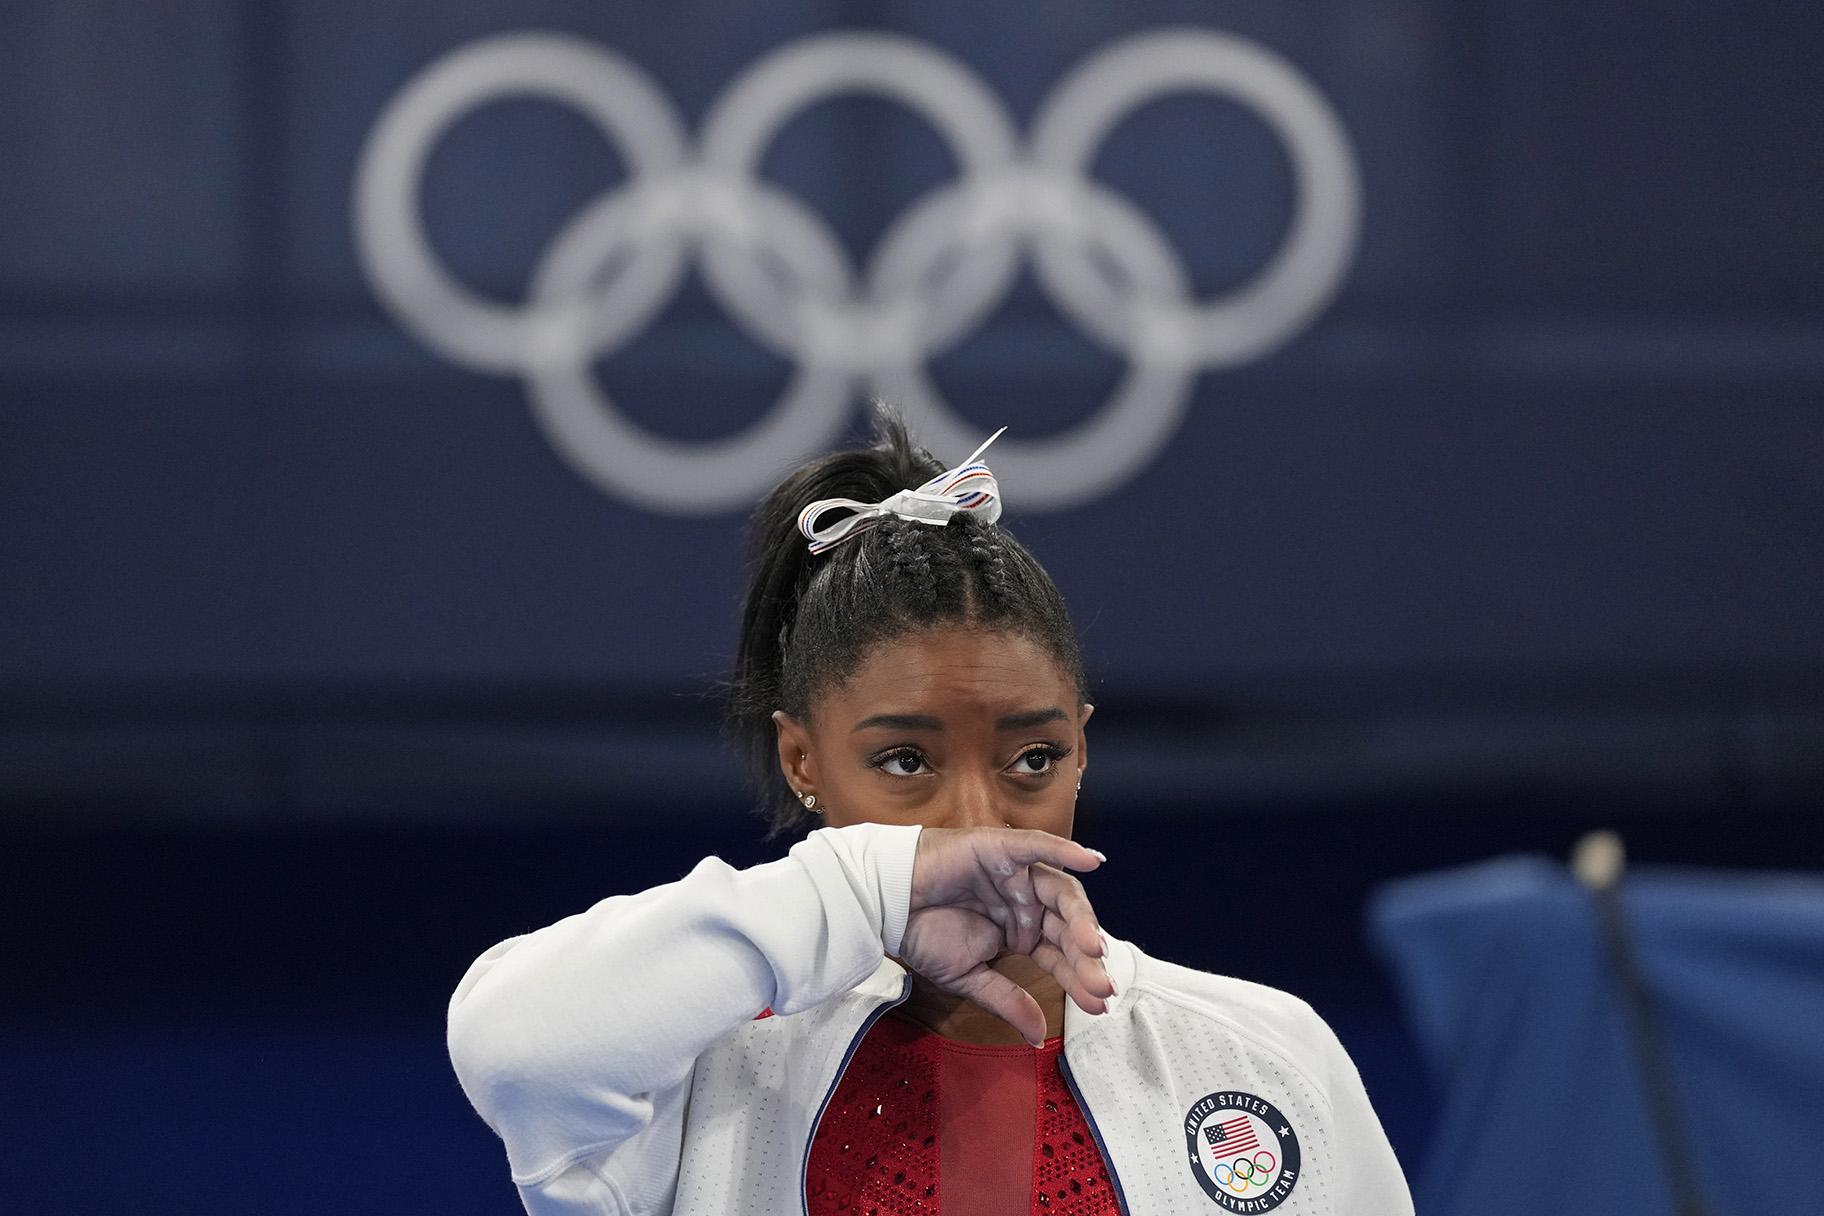 Simone Biles, of the United States, watches gymnasts perform after an apparent injury, at the 2020 Summer Olympics, Tuesday, July 27, 2021, in Tokyo. Biles withdrew from the team finals. (AP Photo / Ashley Landis)